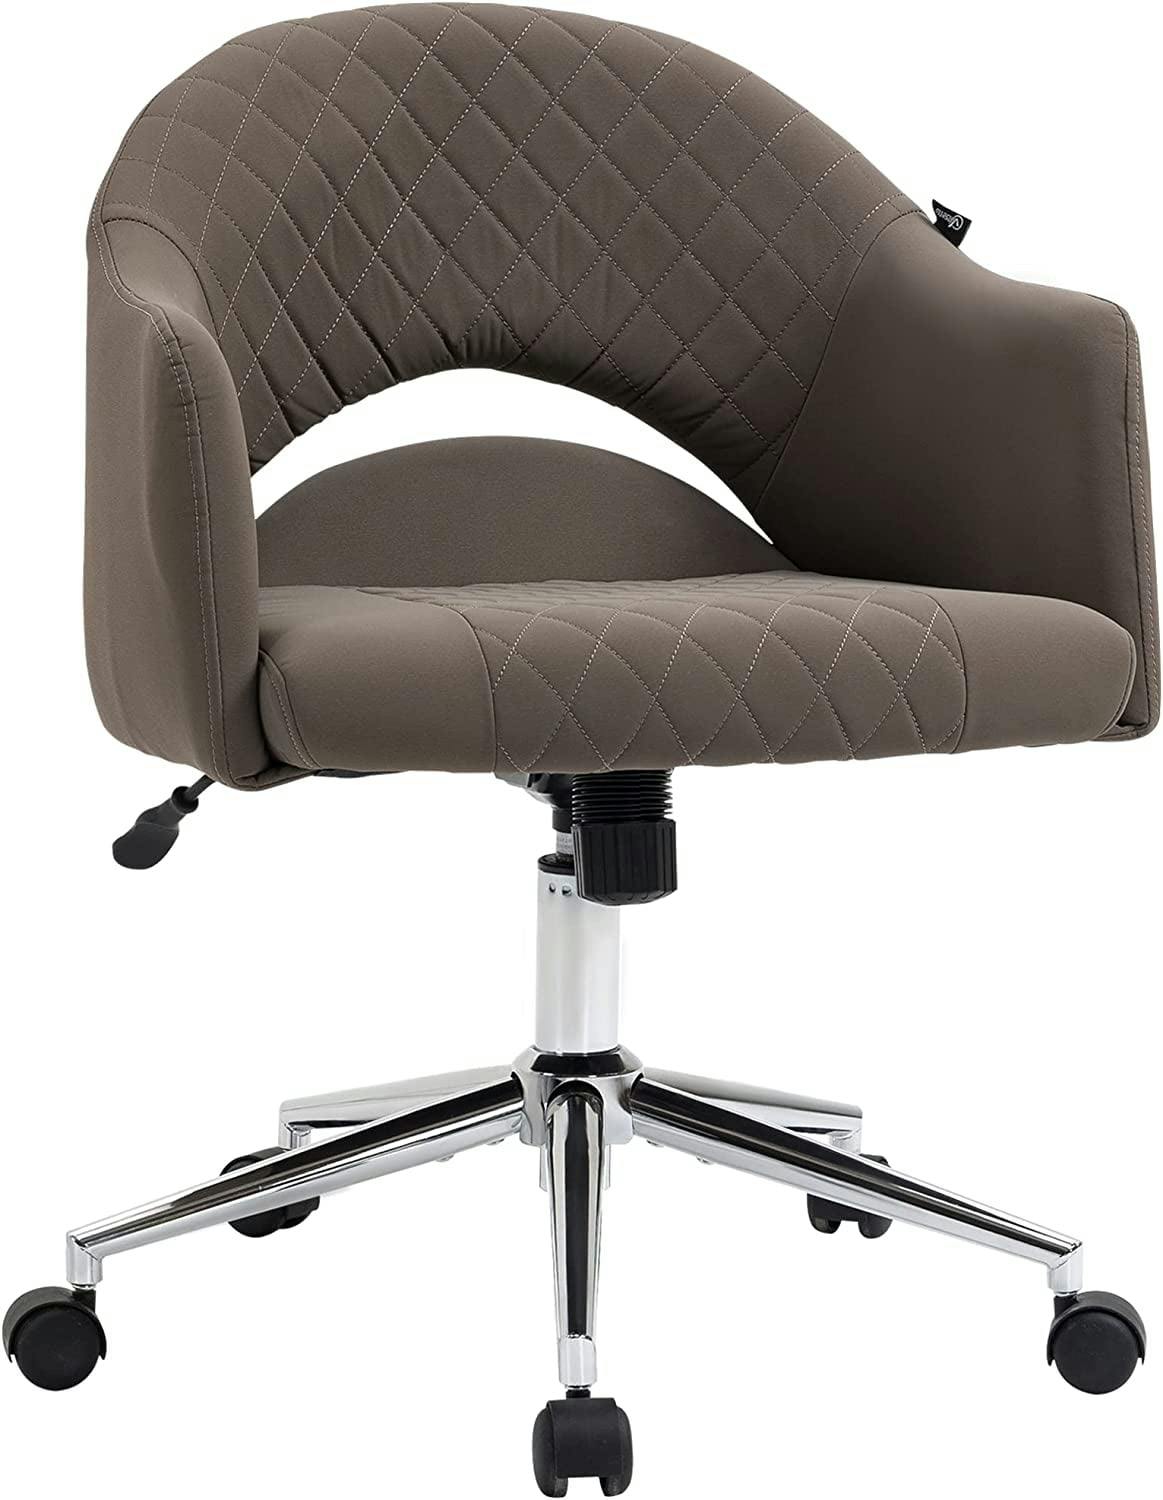 Modern Swivel Task Chair in Brown with Padded Seat and Armrest